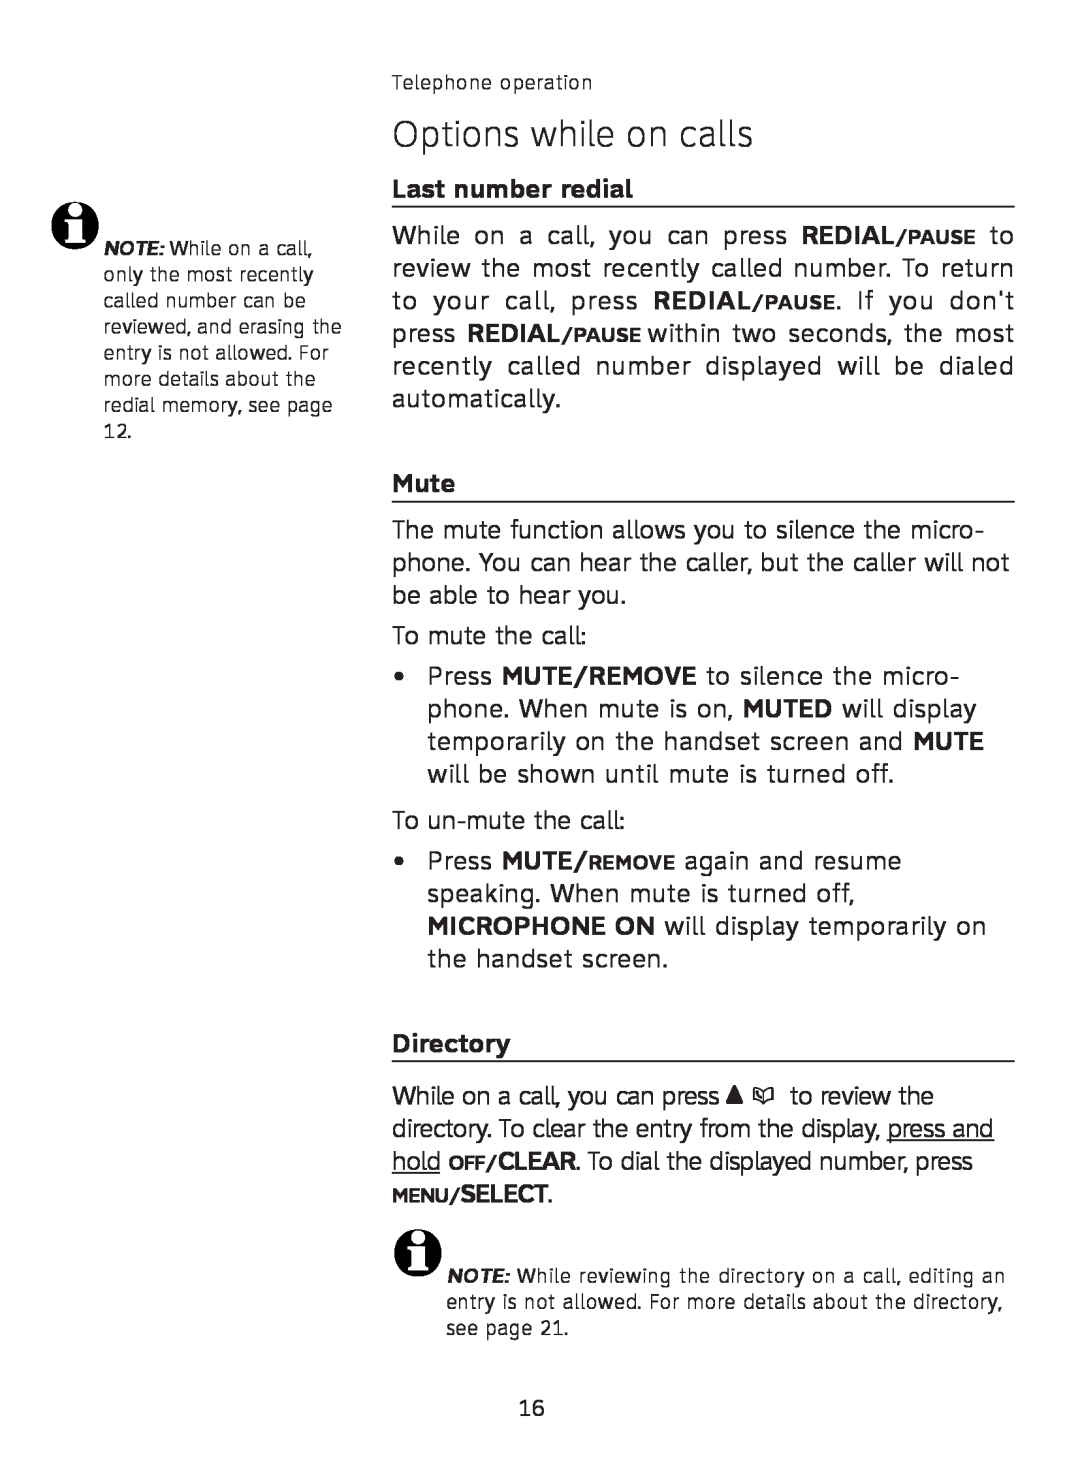 AT&T AT3111-2 user manual Options while on calls, Last number redial, Mute, Directory, Menu/Select 